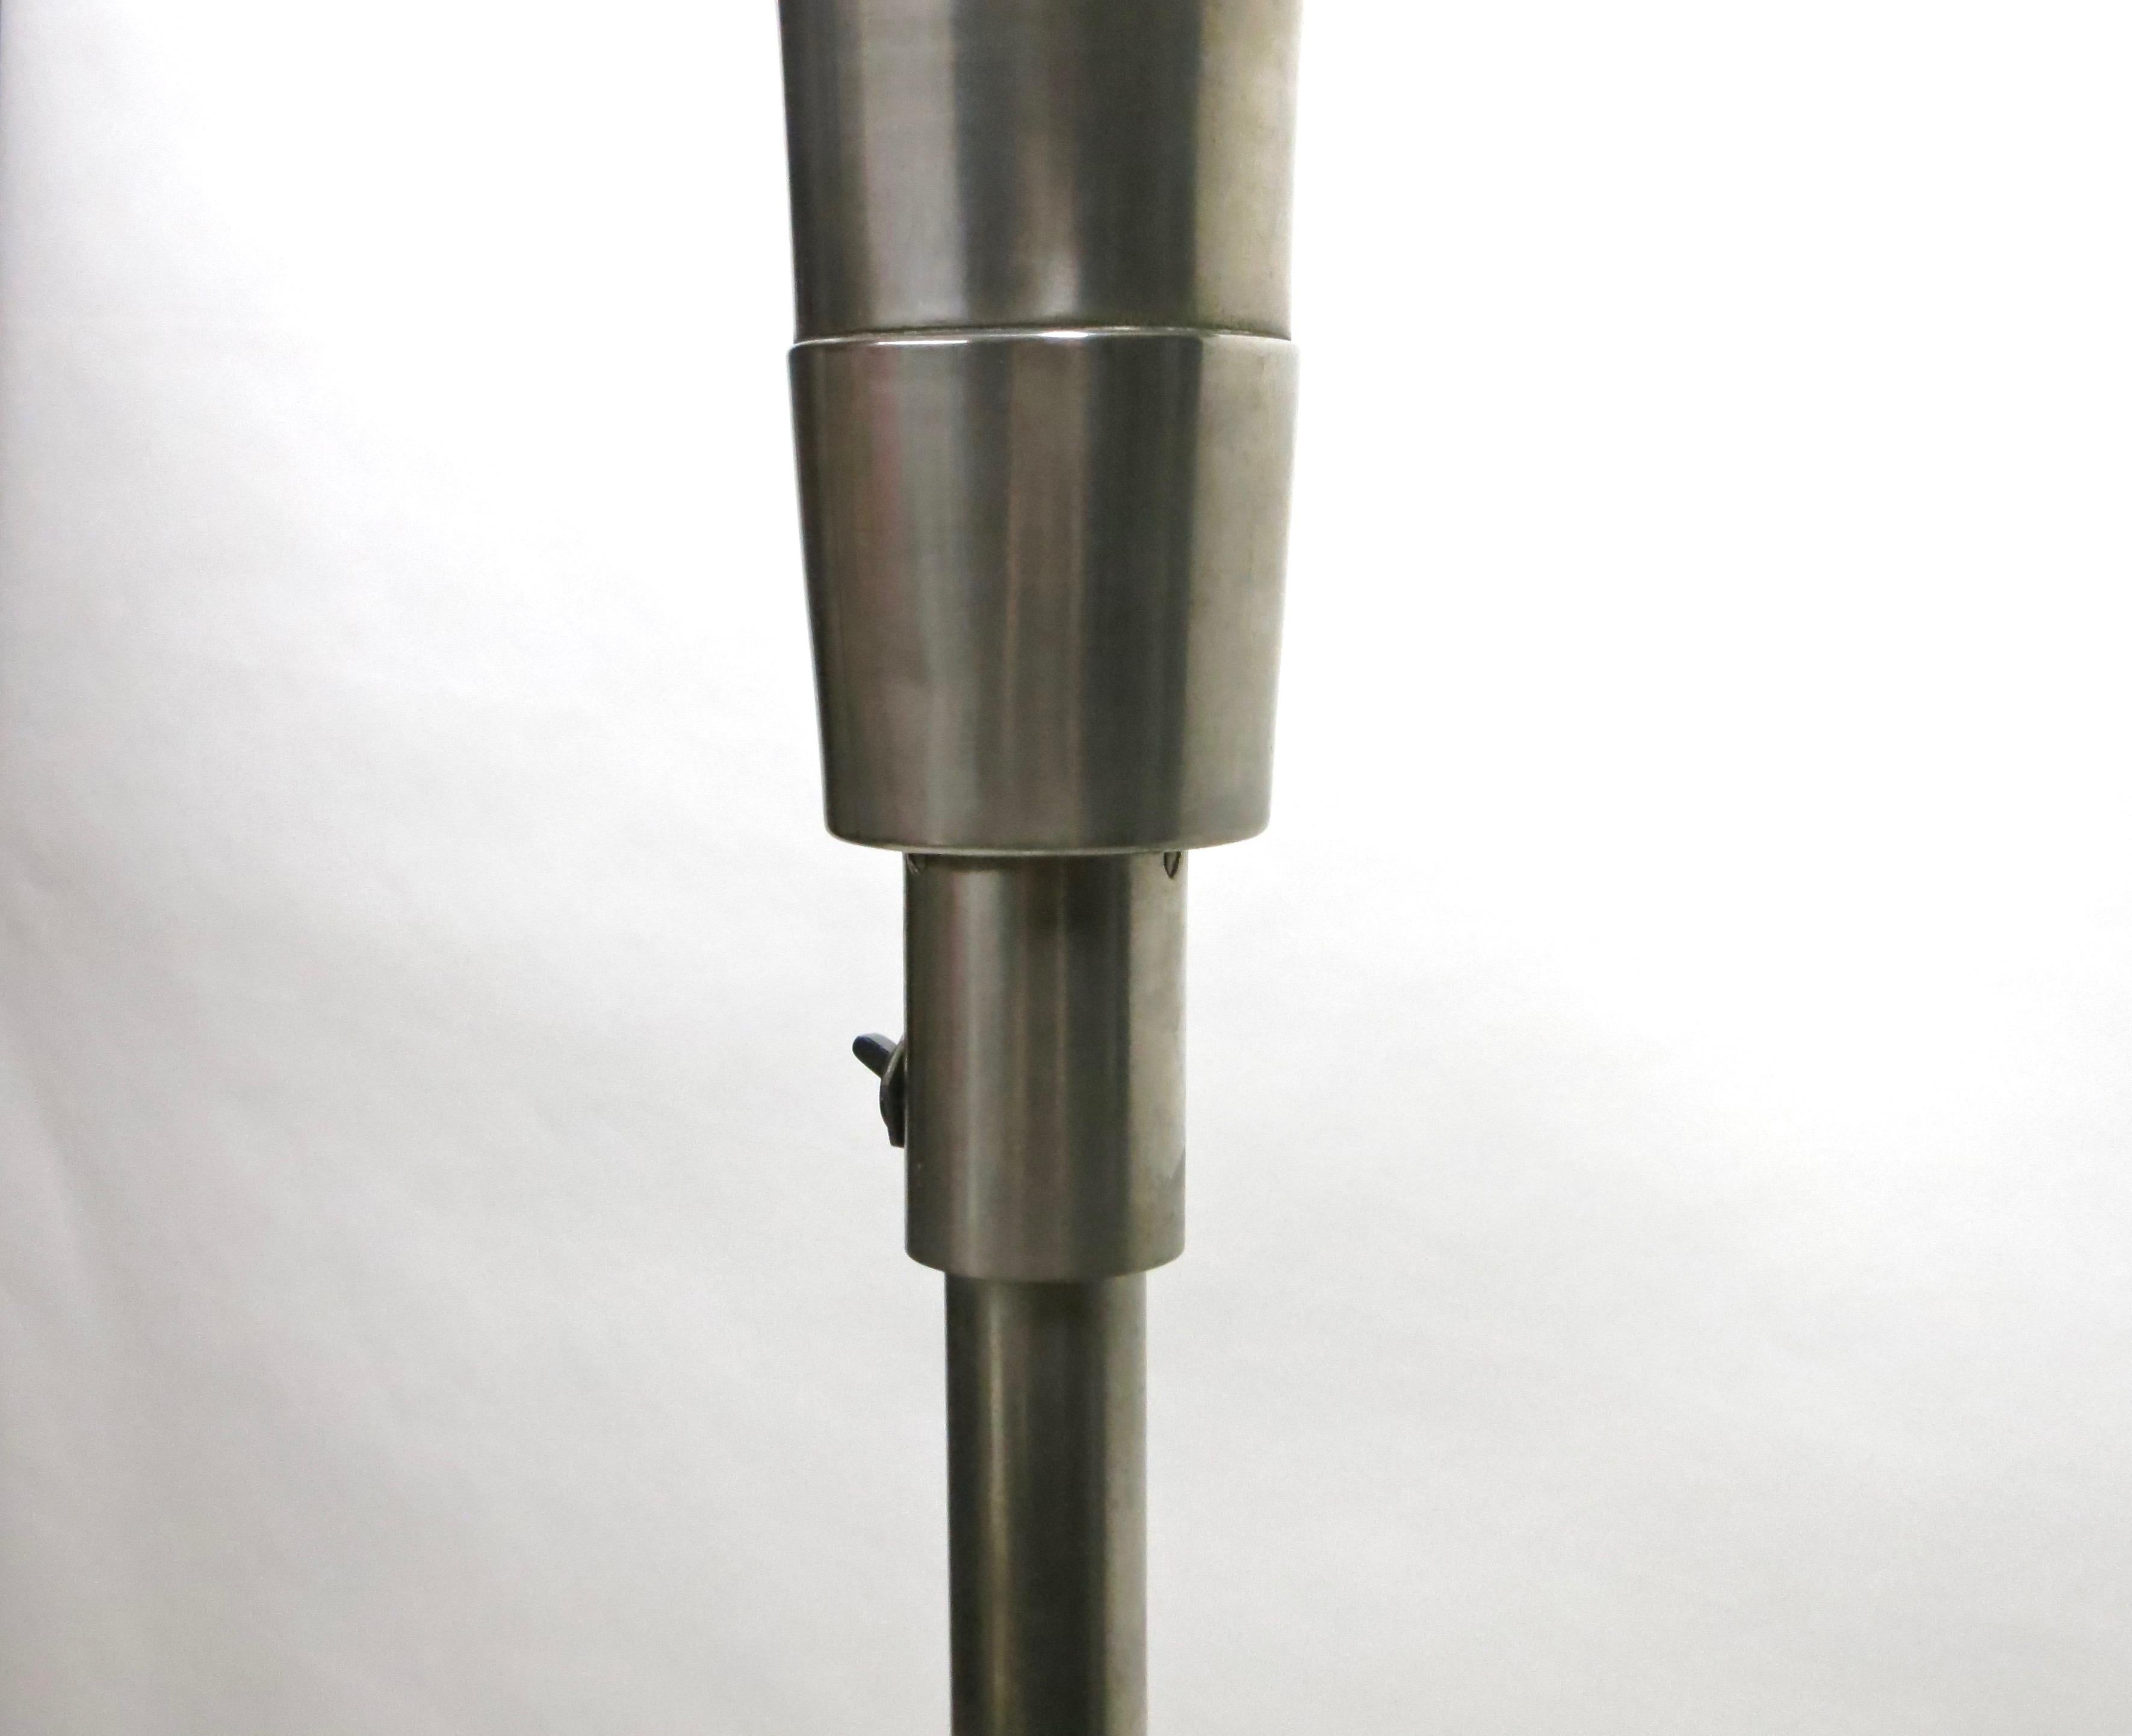 Nickel-Plated Copper Floor Lamp / Torchiere, France Circa 1930 For Sale 1